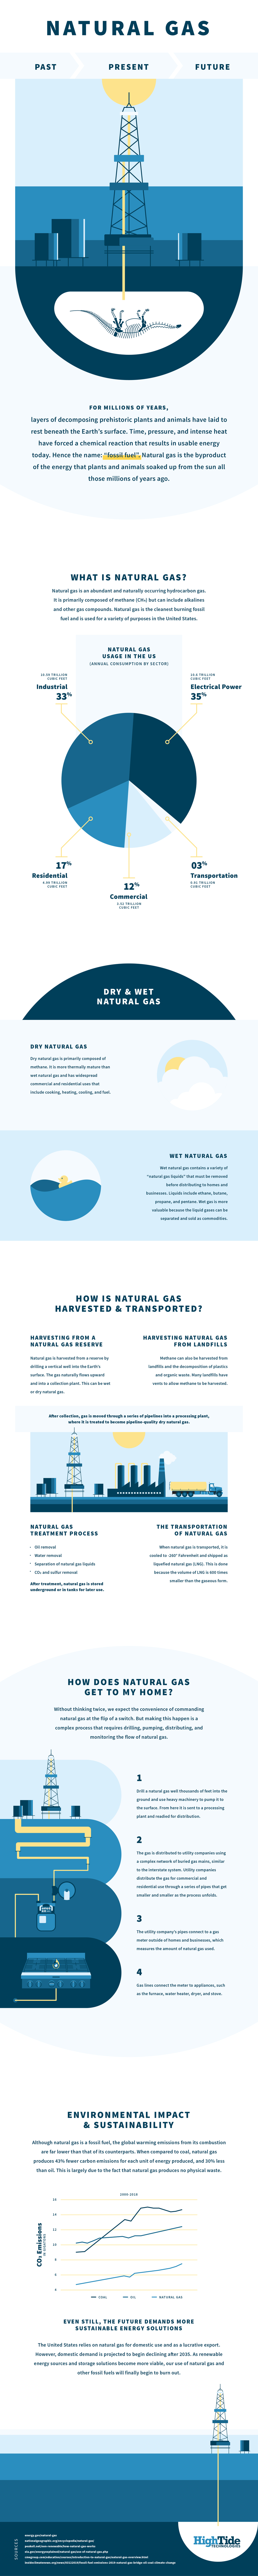 Natural Gas: the Past, Present, and Future - Infographic by High Tide Technologies